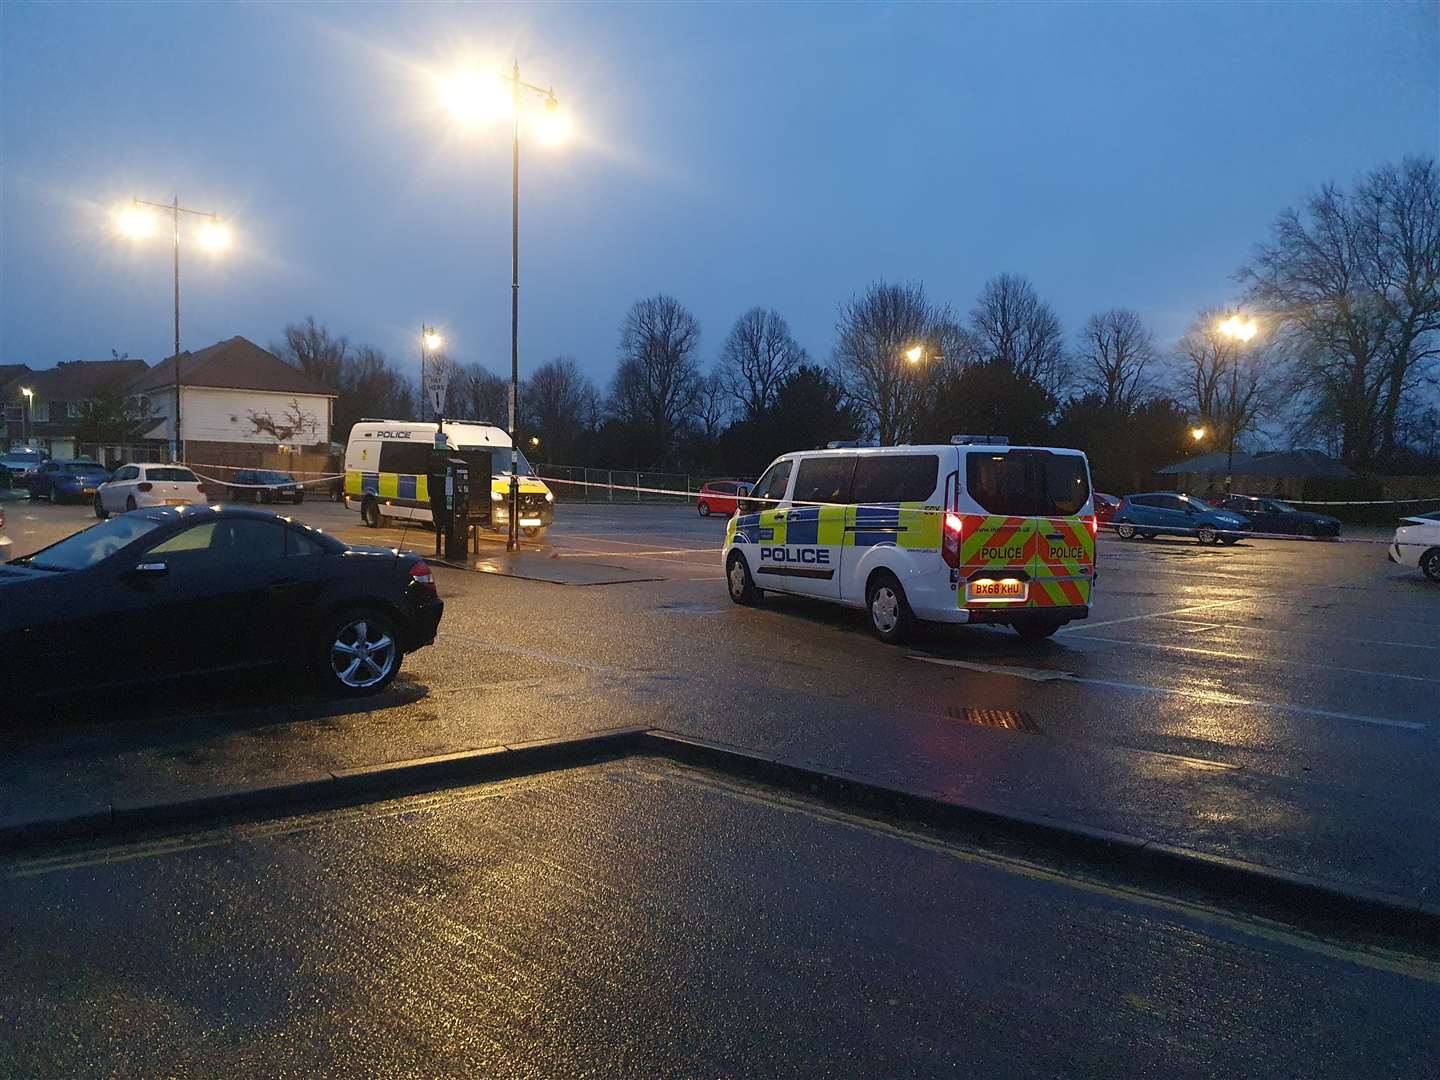 Officers are parked up in the Guildhall car park in Sandwich and are carrying out searches confirmed to be part of the investigation into the death of Sarah Everard